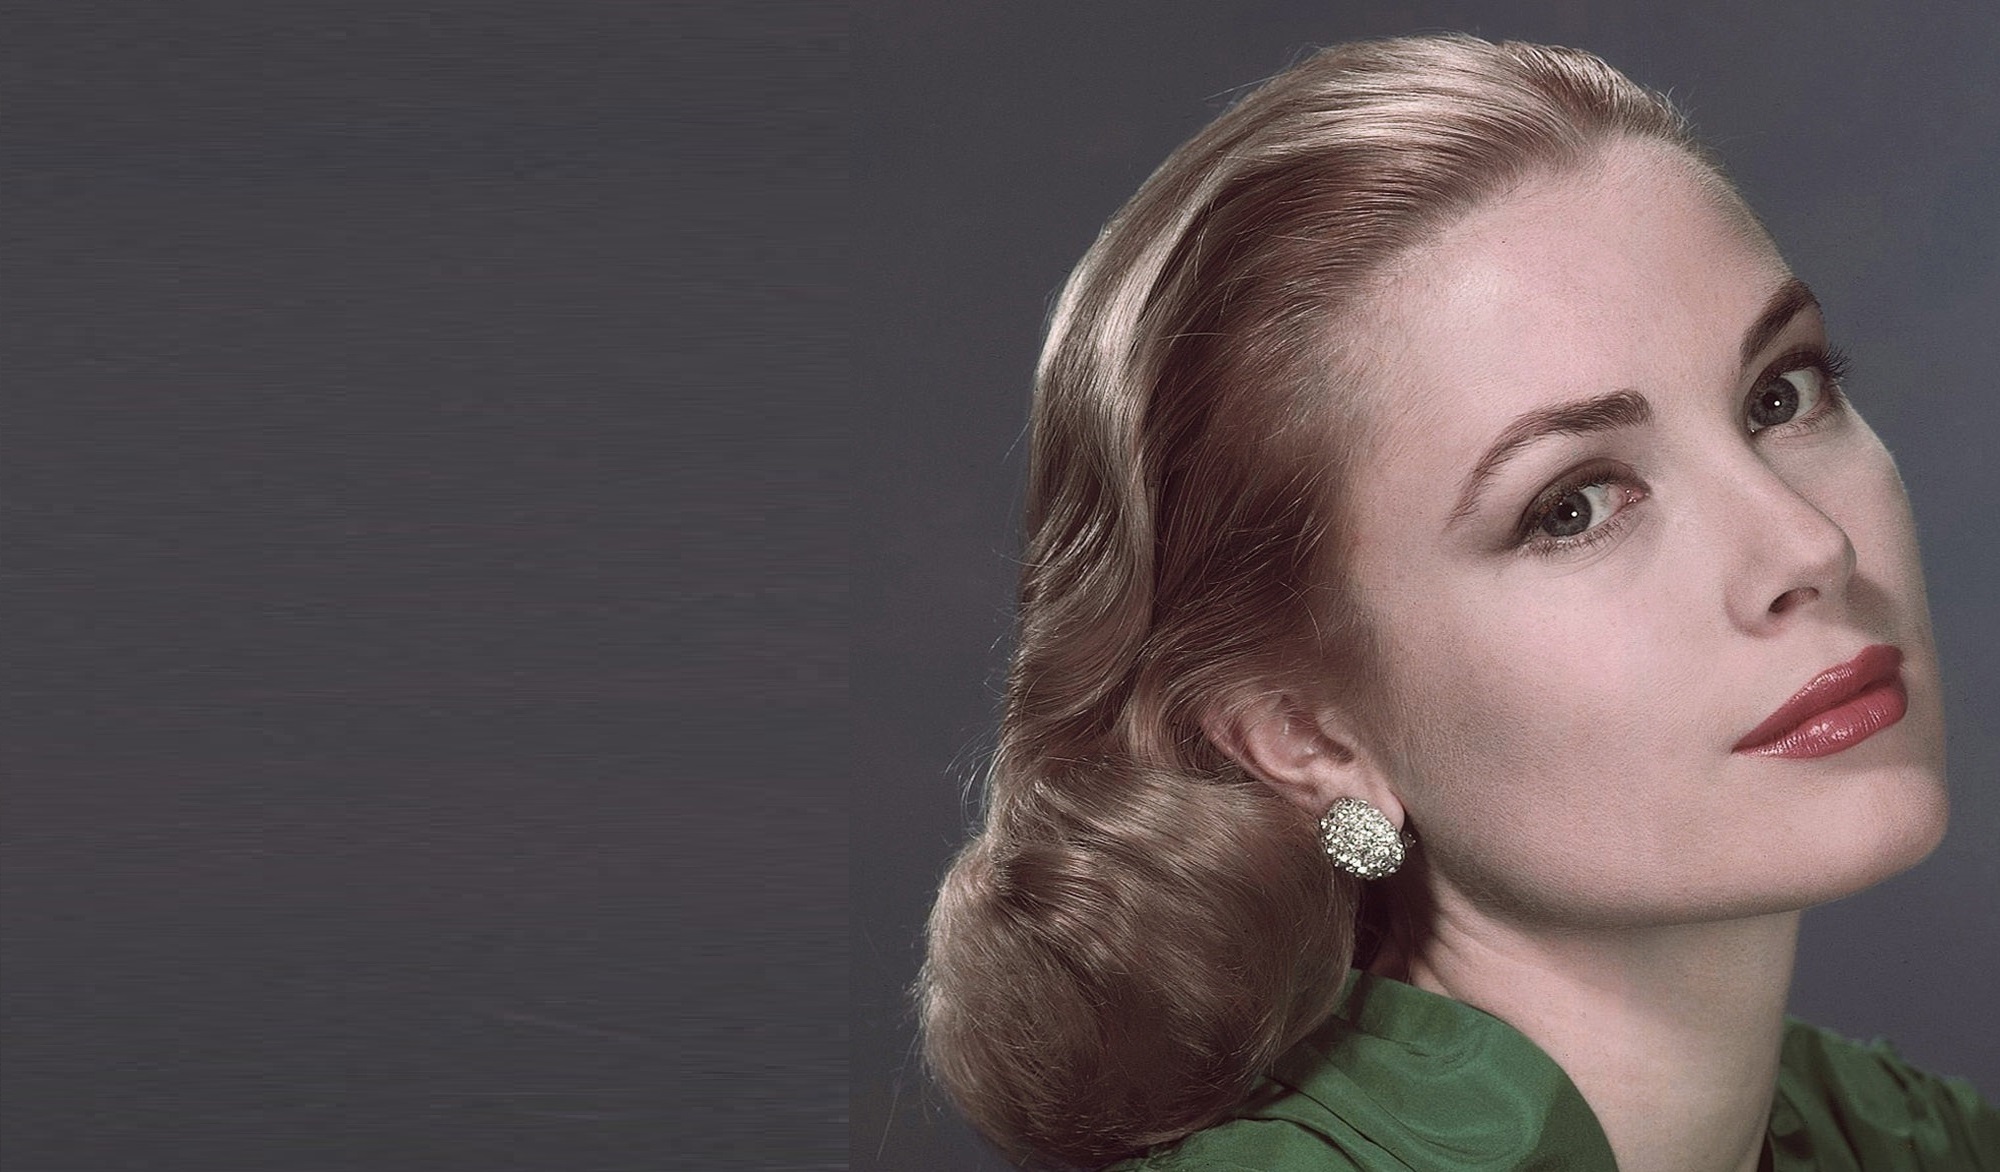 This undated file photo shows Grace Kelly. An exhibit on Kelly